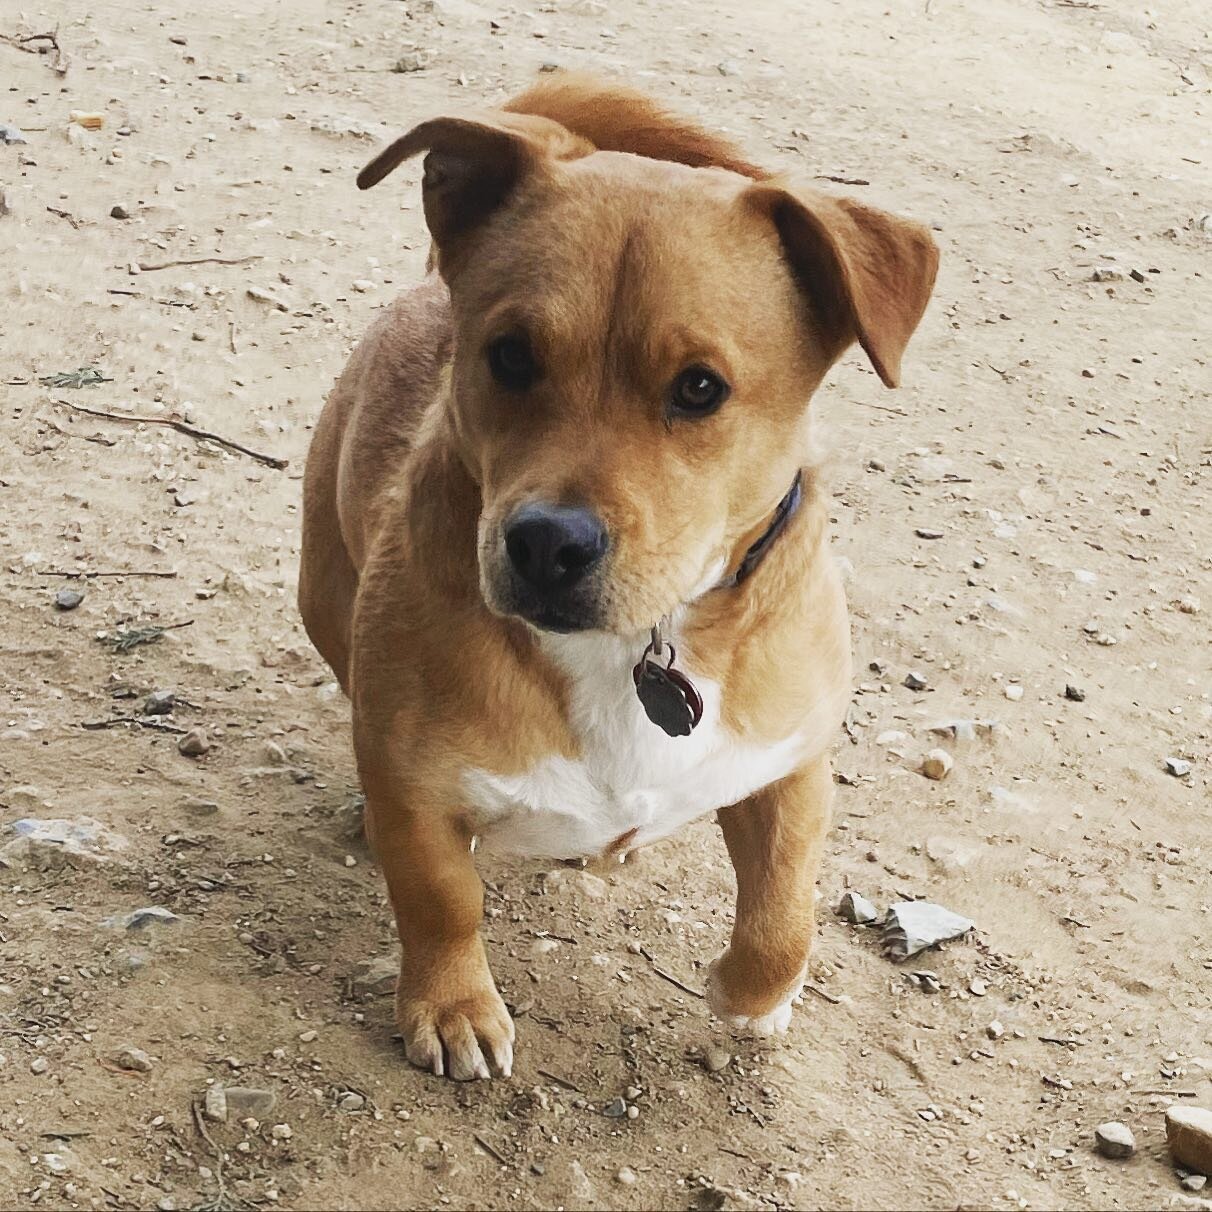 Meet Chili. This 3 year old low rider is a super mutt and a super cuddler. A mix of all kinds of big dogs like staffie, Chow and something with shorter legs. He found his furever family through a rescue organization in Long Island when he was 8 month